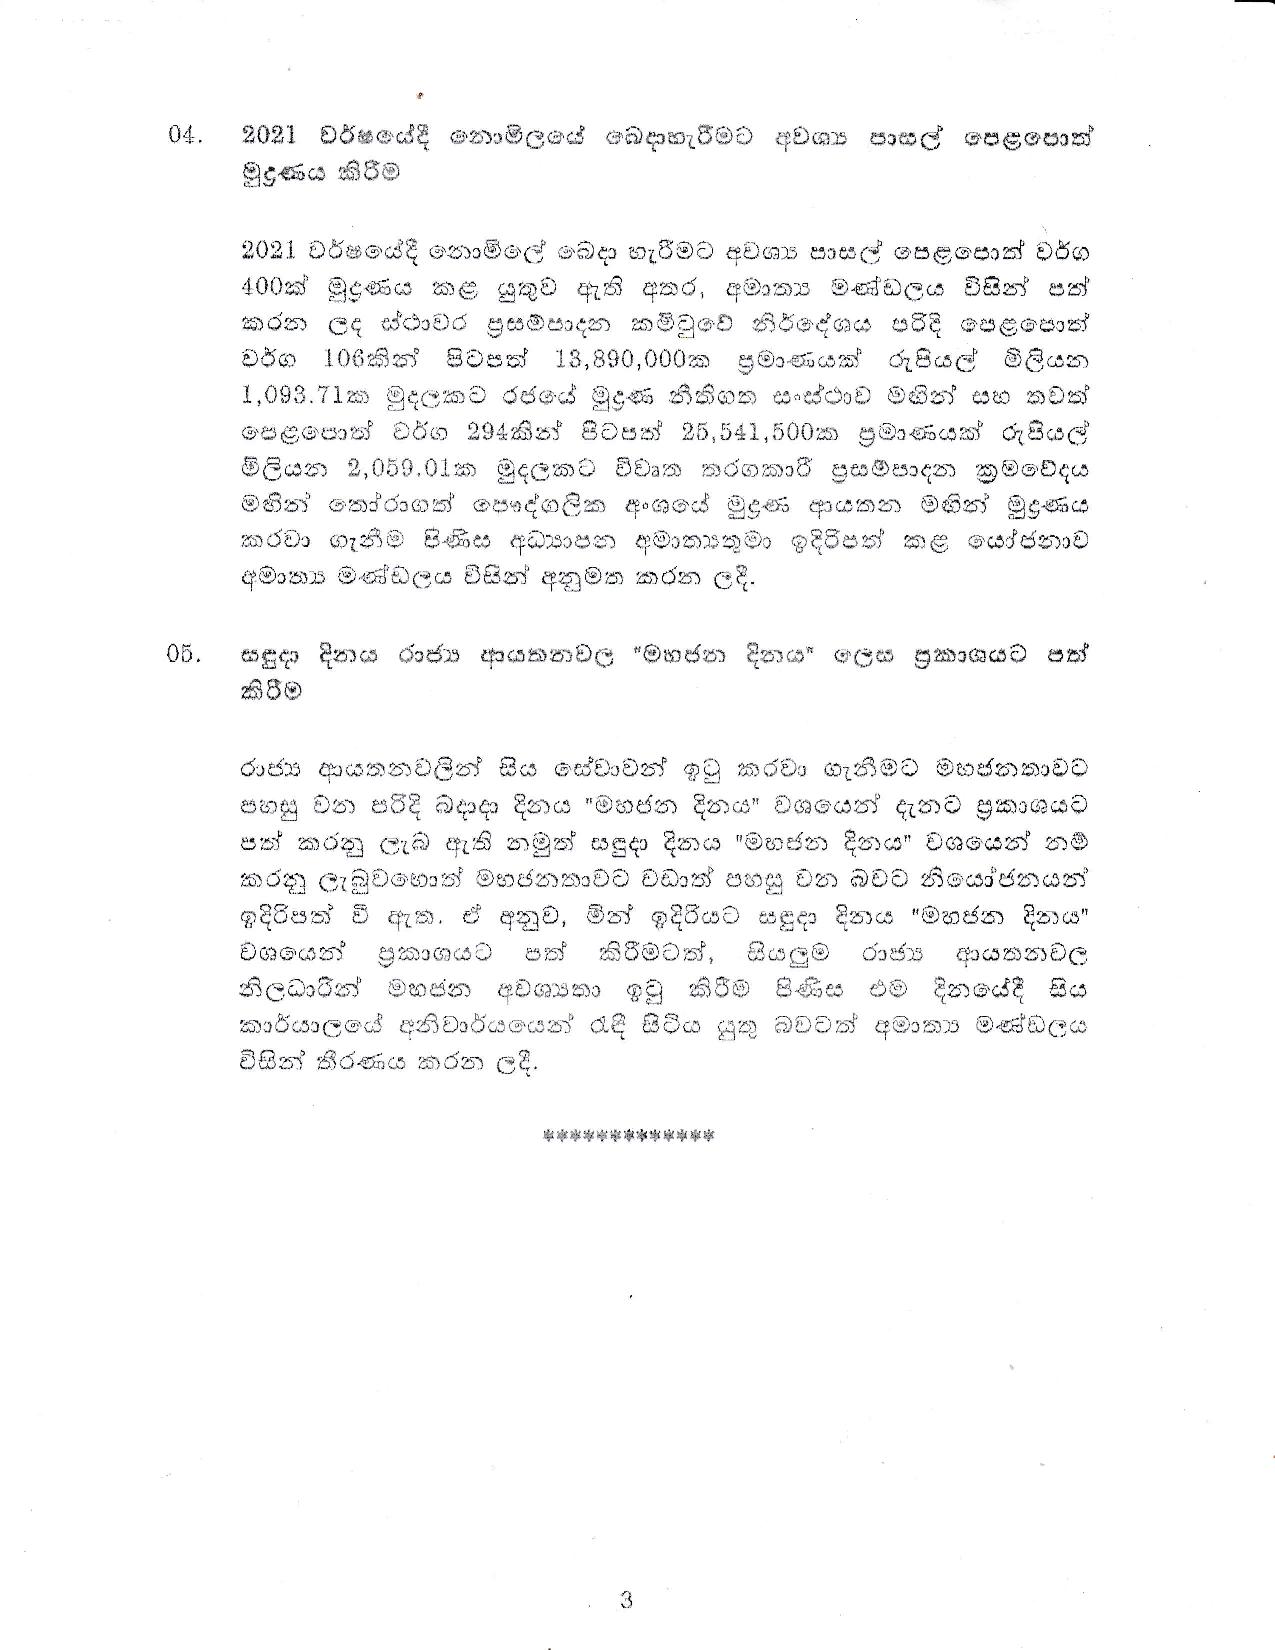 Cabinet Decision on 09.09.2020 page 003